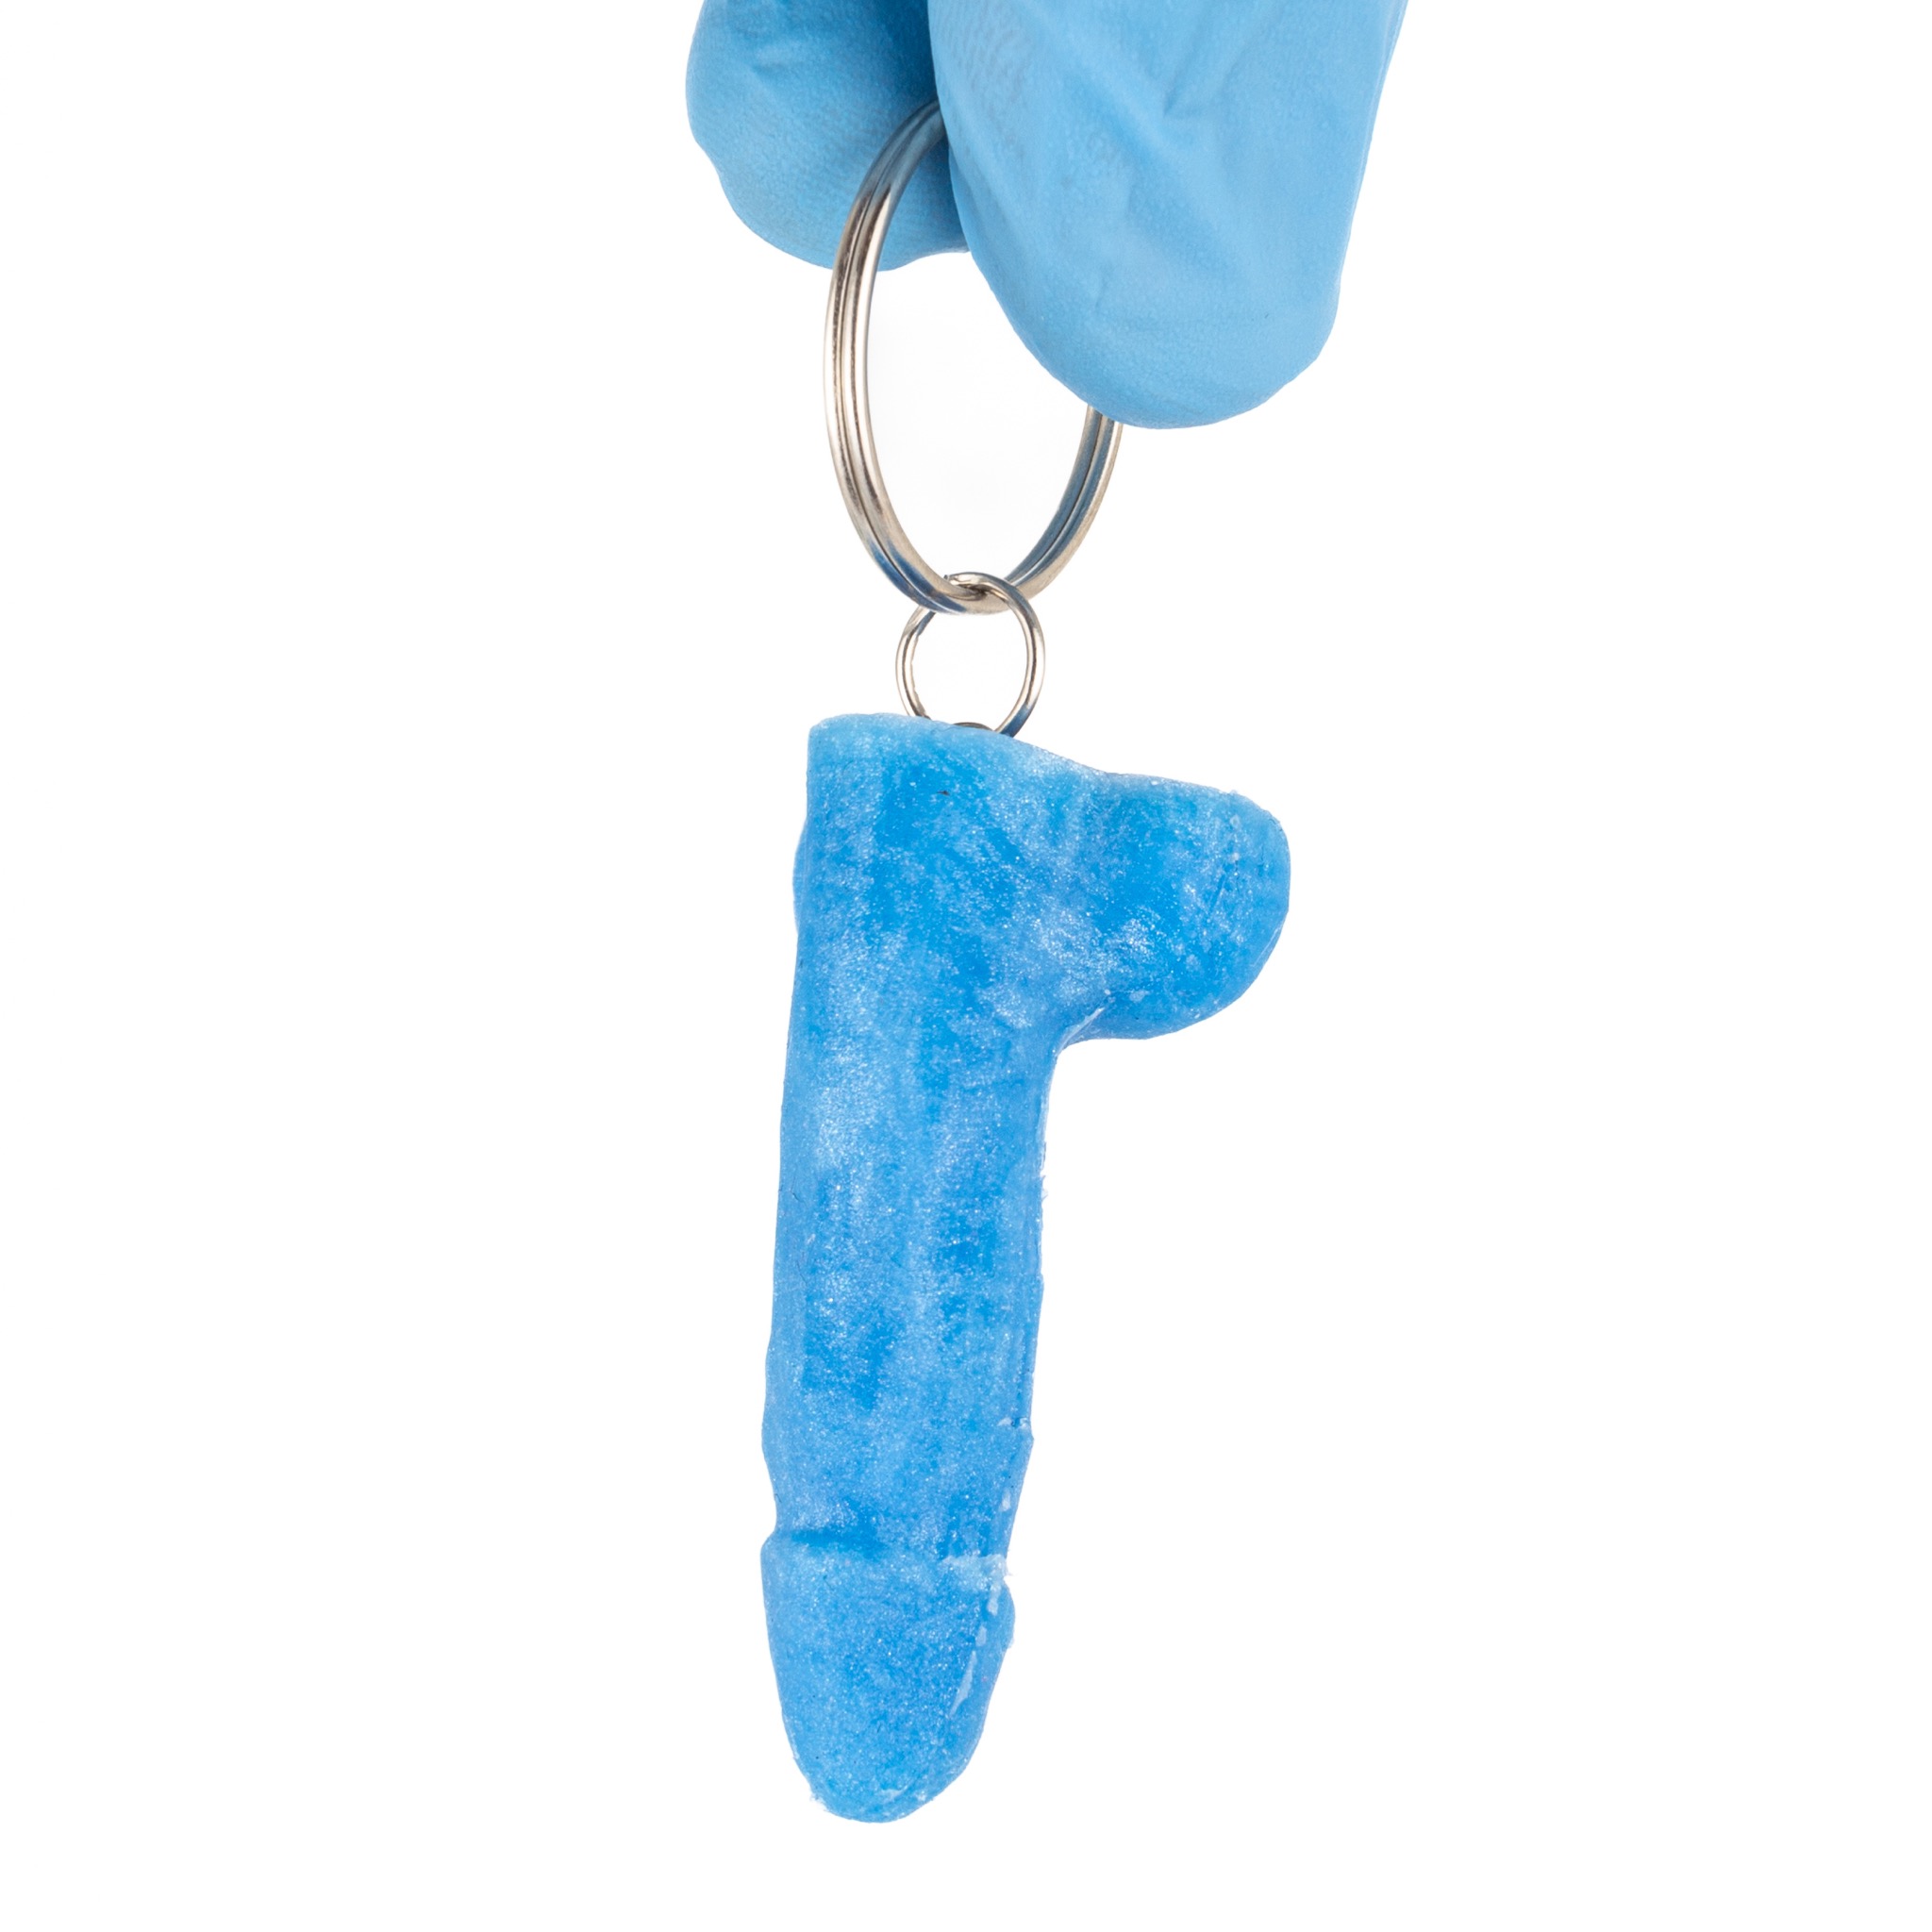 FAB.toys Little Dicky Silicone Keychain